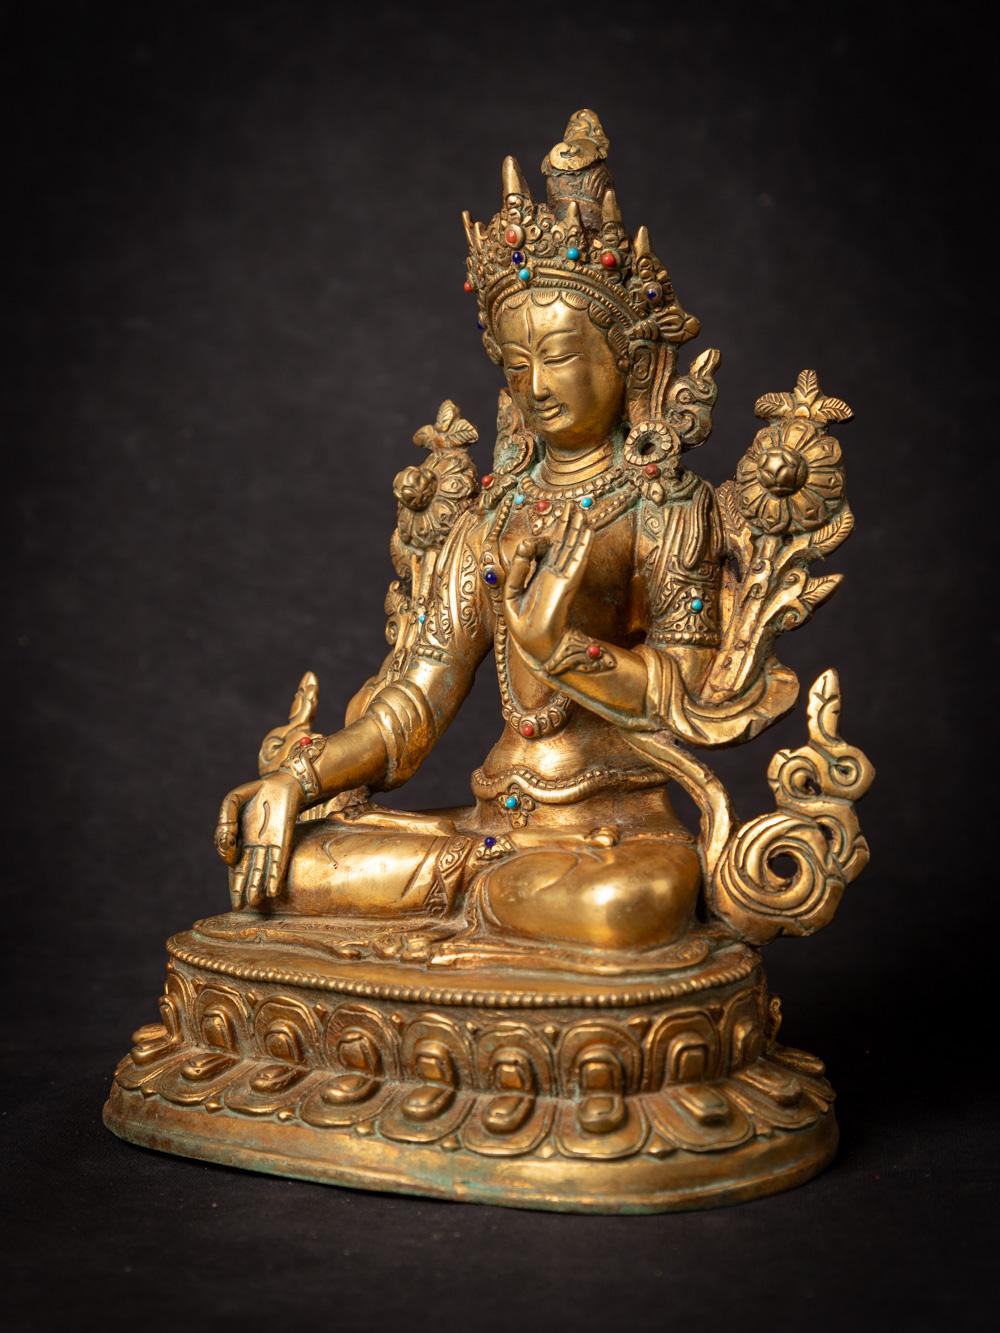 This bronze sculpture, originating from Nepal during the mid-20th century, is a true work of art. It stands at a height of 22.3 cm and boasts dimensions of 17 cm in width and 12.5 cm in depth. Crafted from bronze and fire-gilded with 24-karat gold,